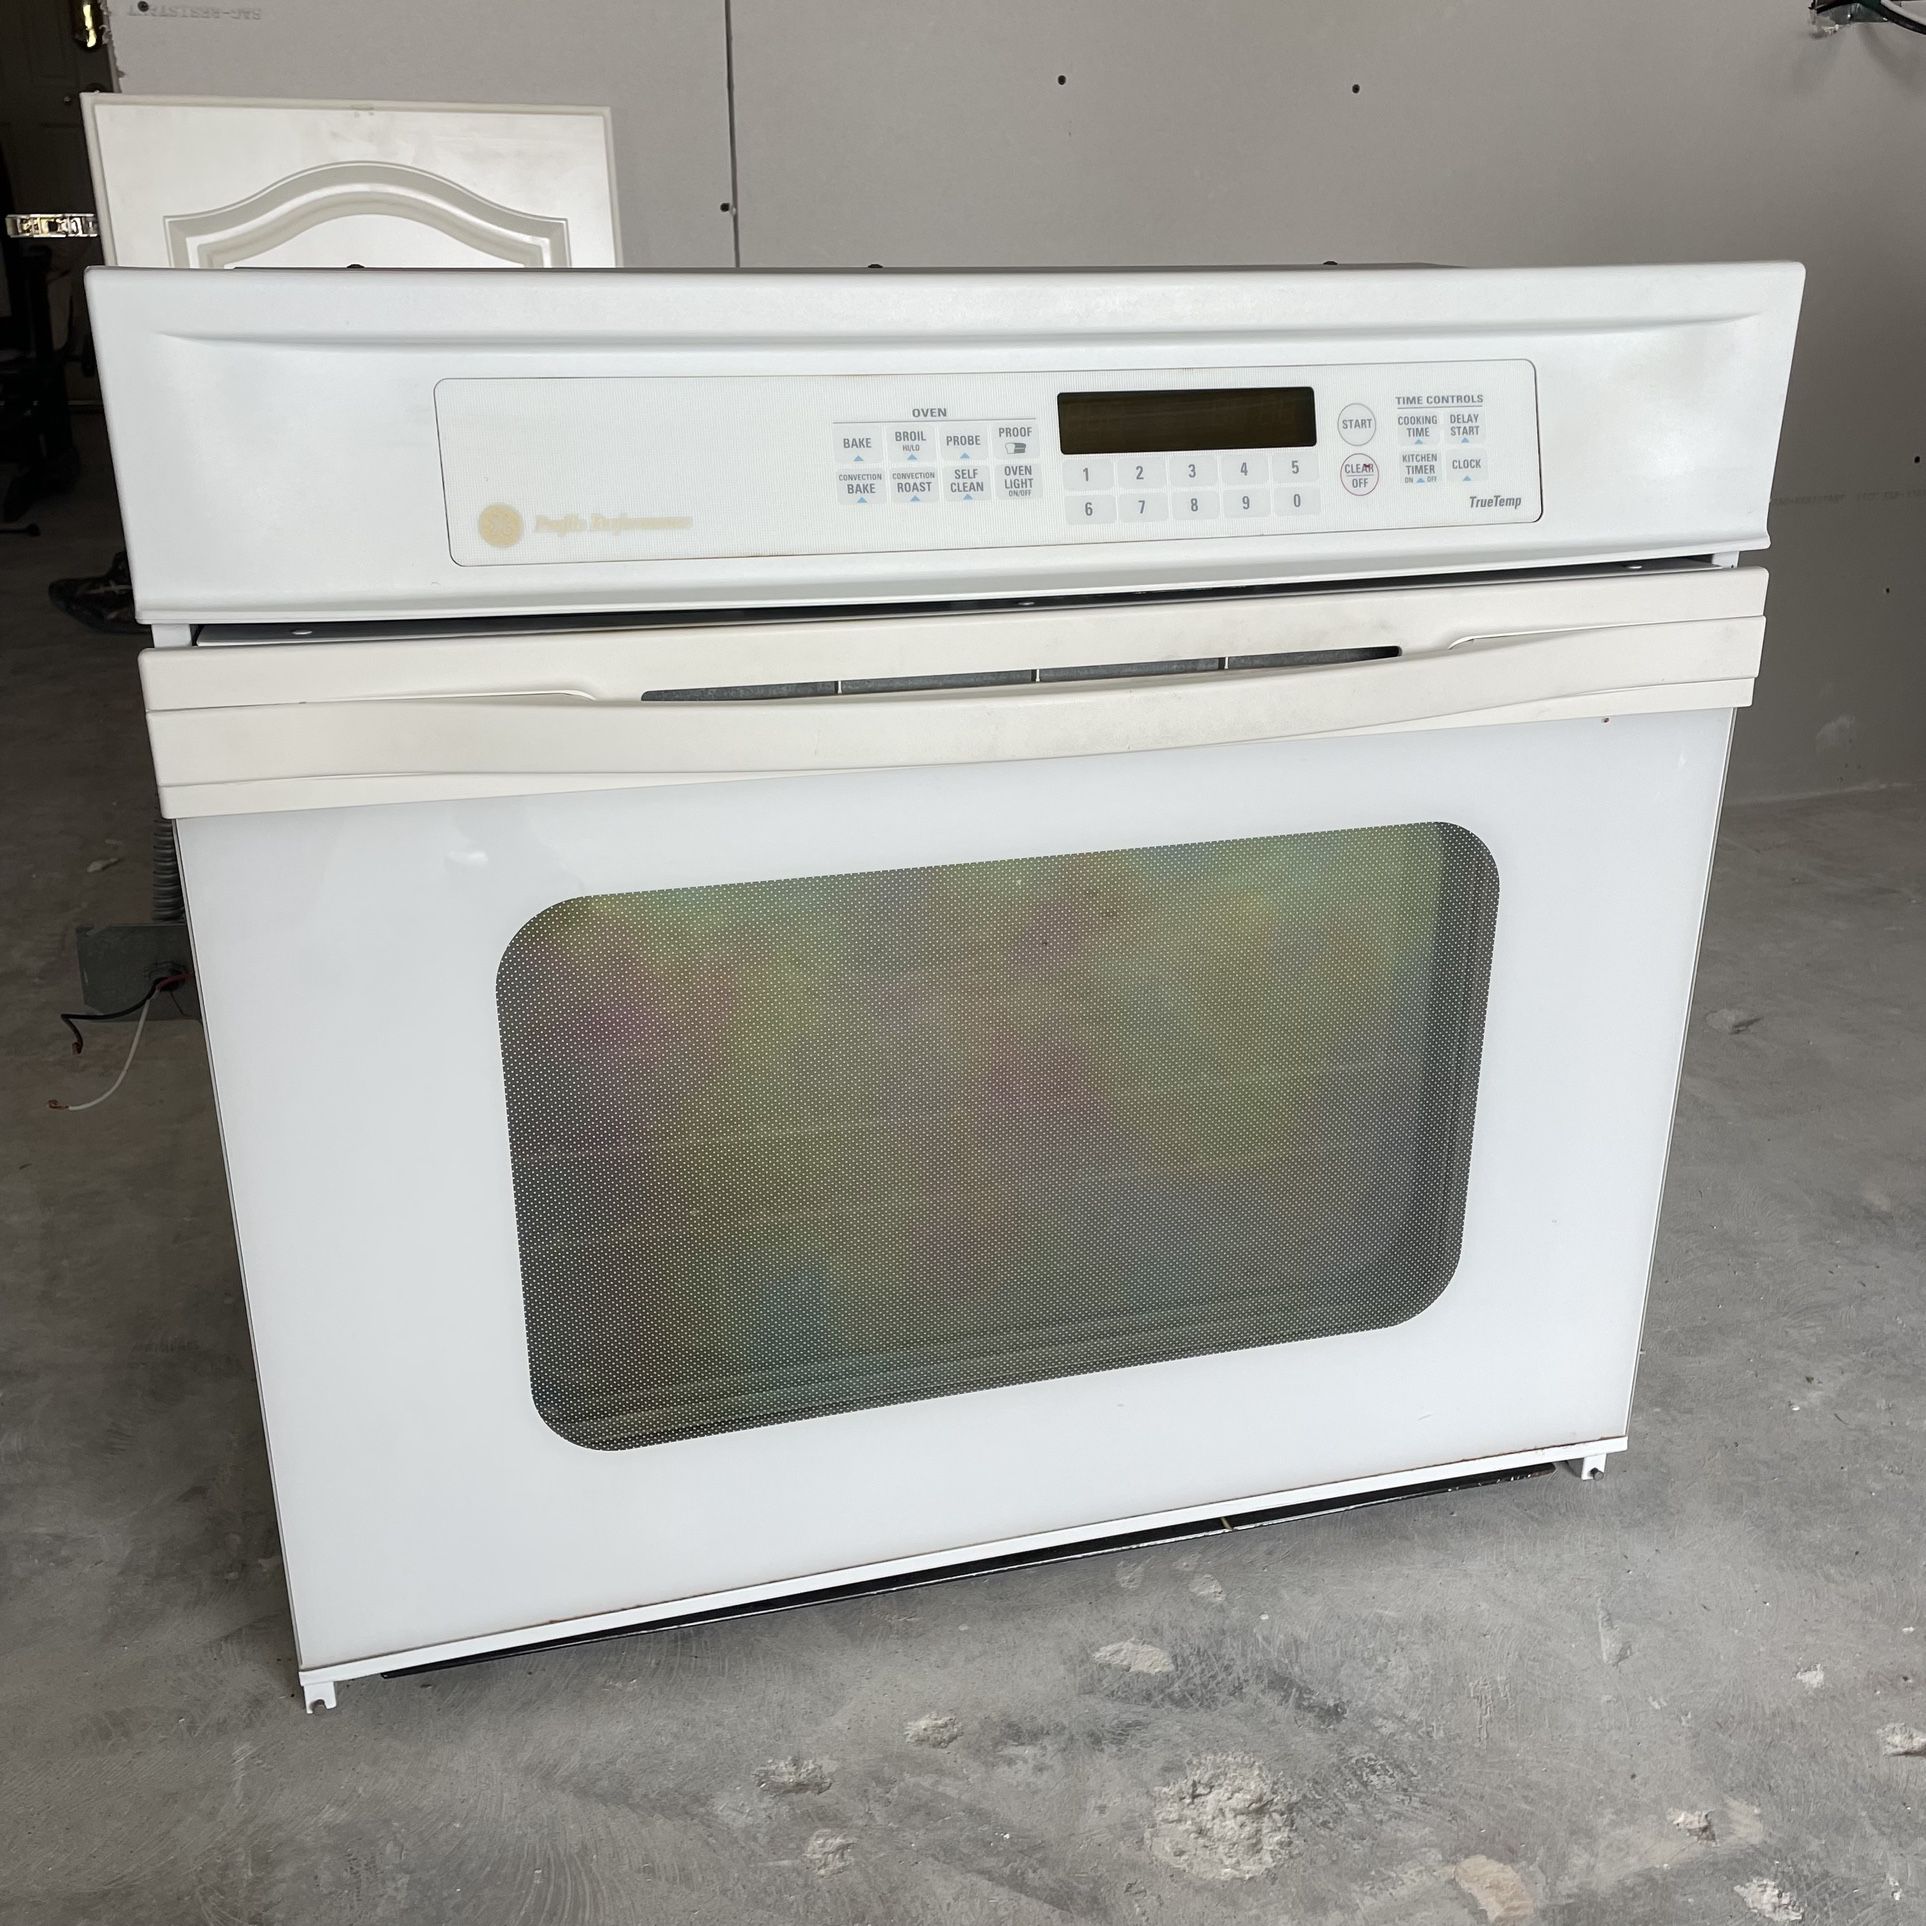 Free Oven: GE Profile Performance Wall oven